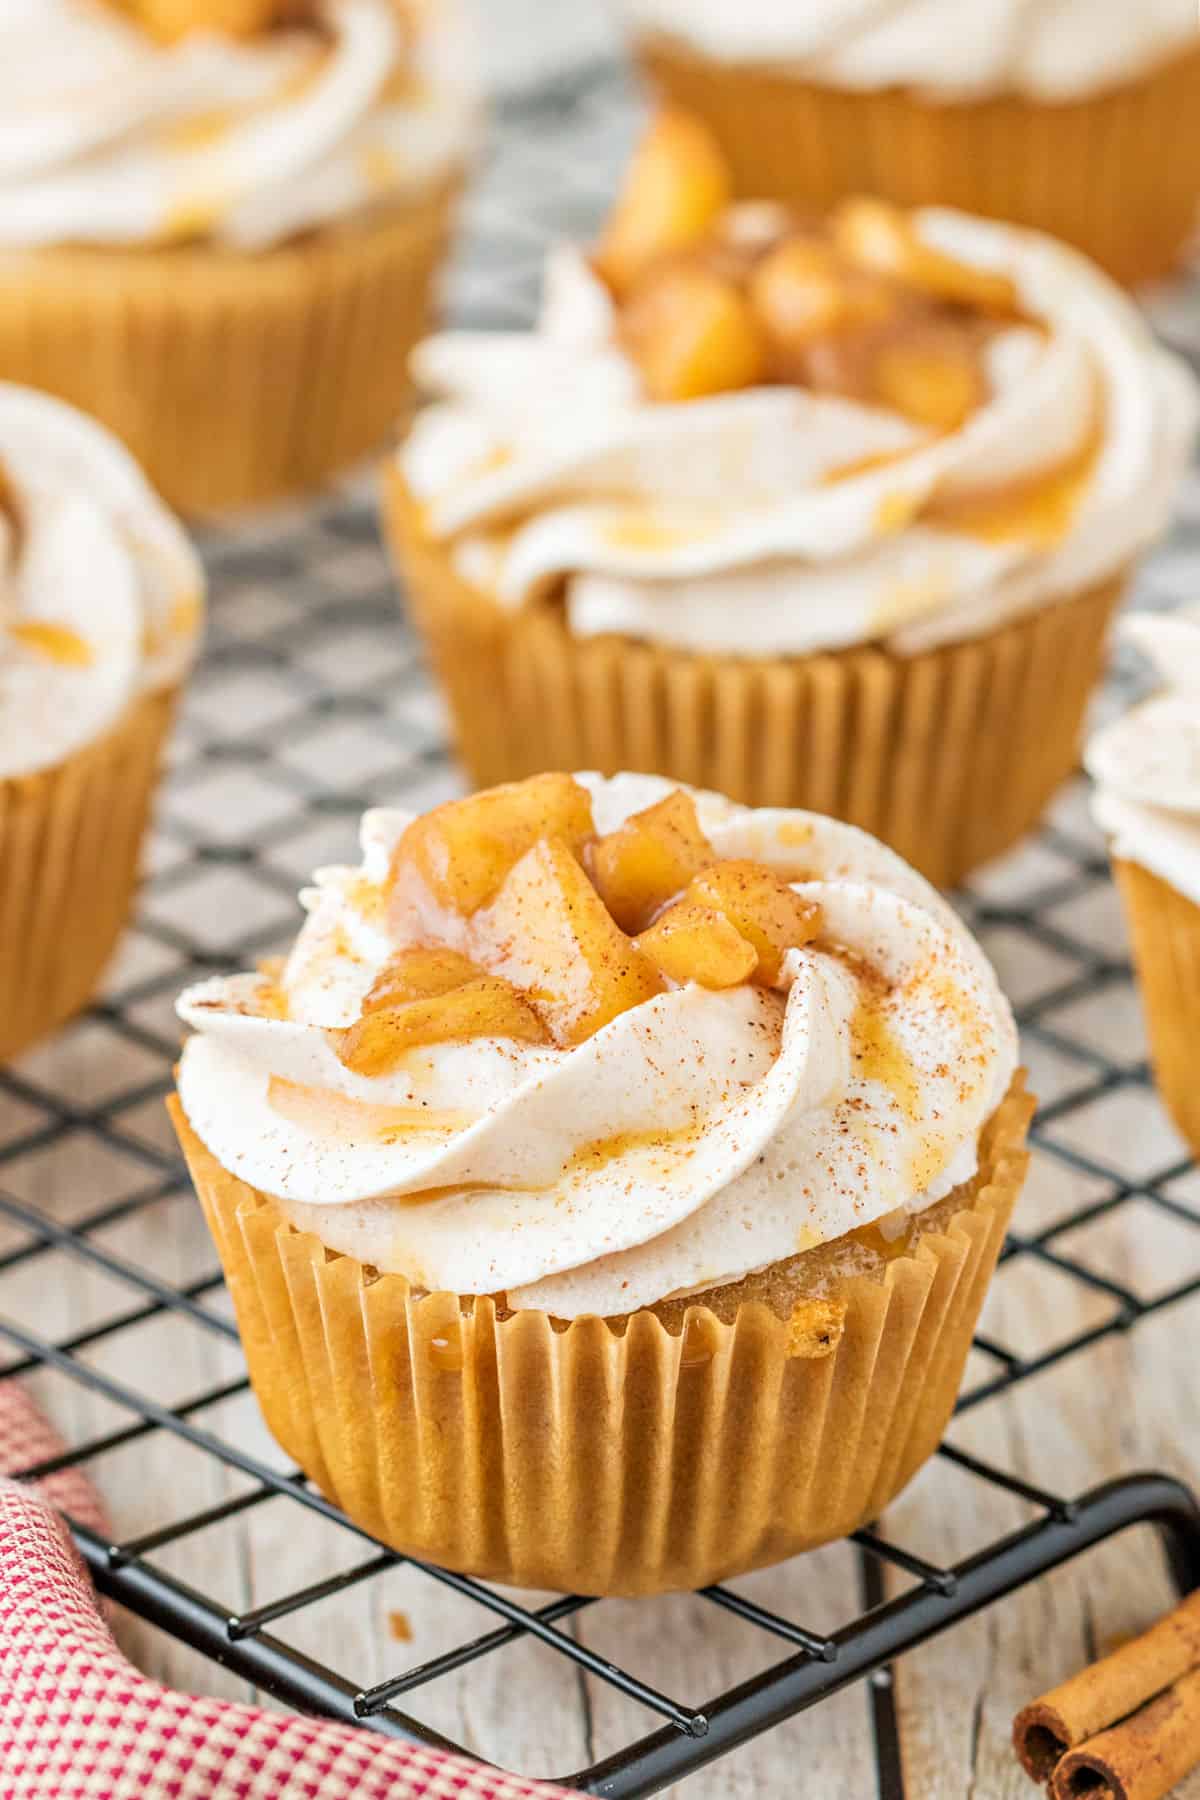 Apple topped cupcakes with frosting on a wire cooling rack.